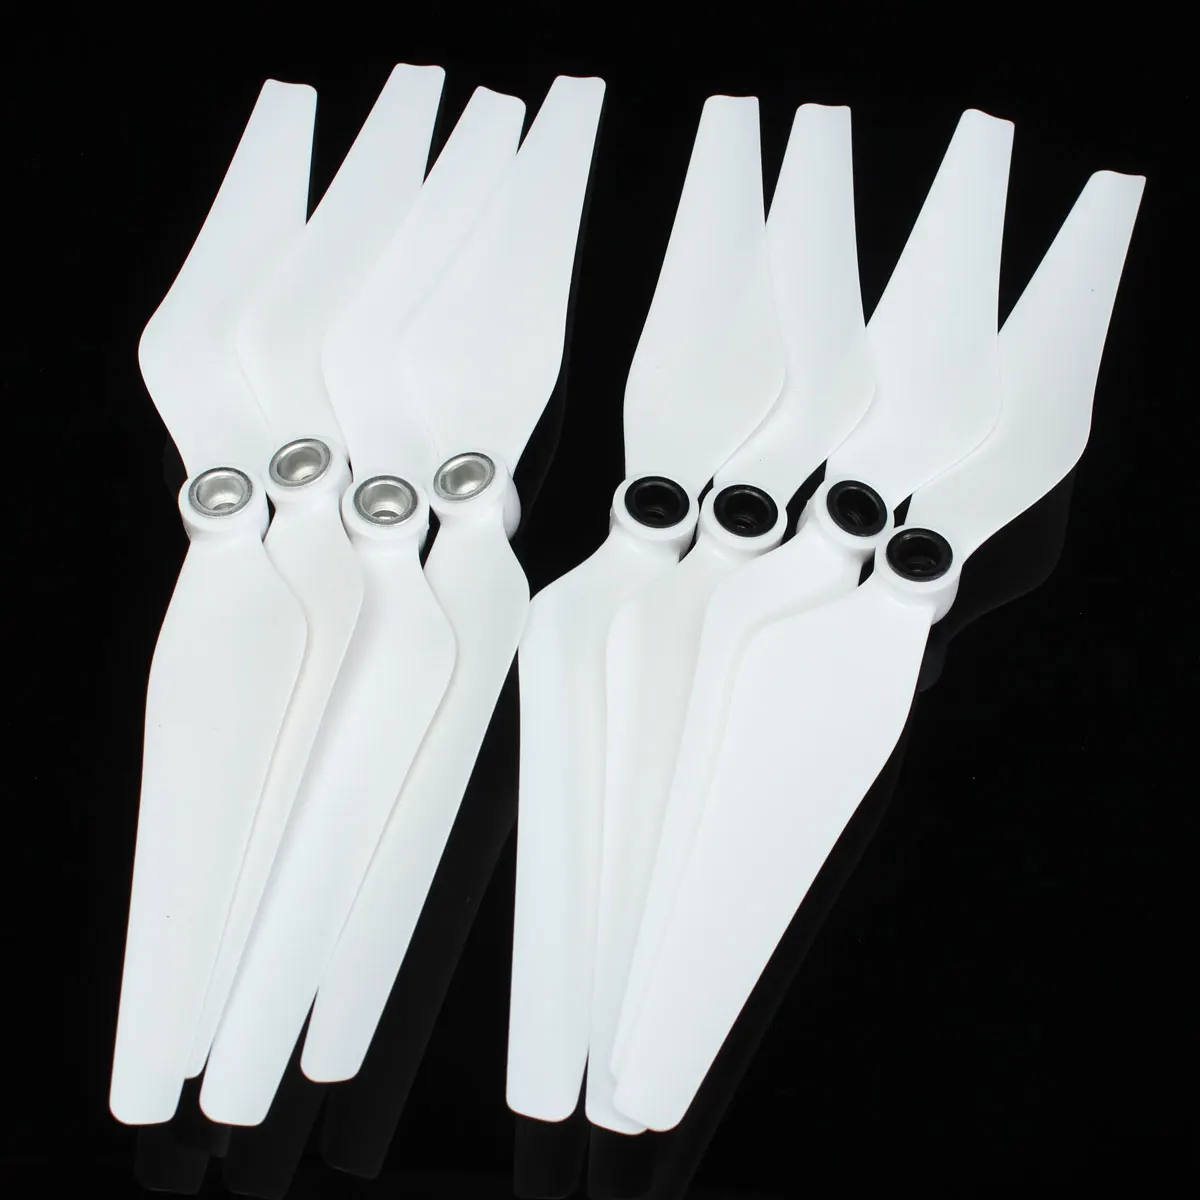 

4 Pairs 8pcs Propeller 9450 Drone Self-locking CW CCW Prop Propeller For Phantom 1 2 3 Vision Wing Fan CW CCW Replacement